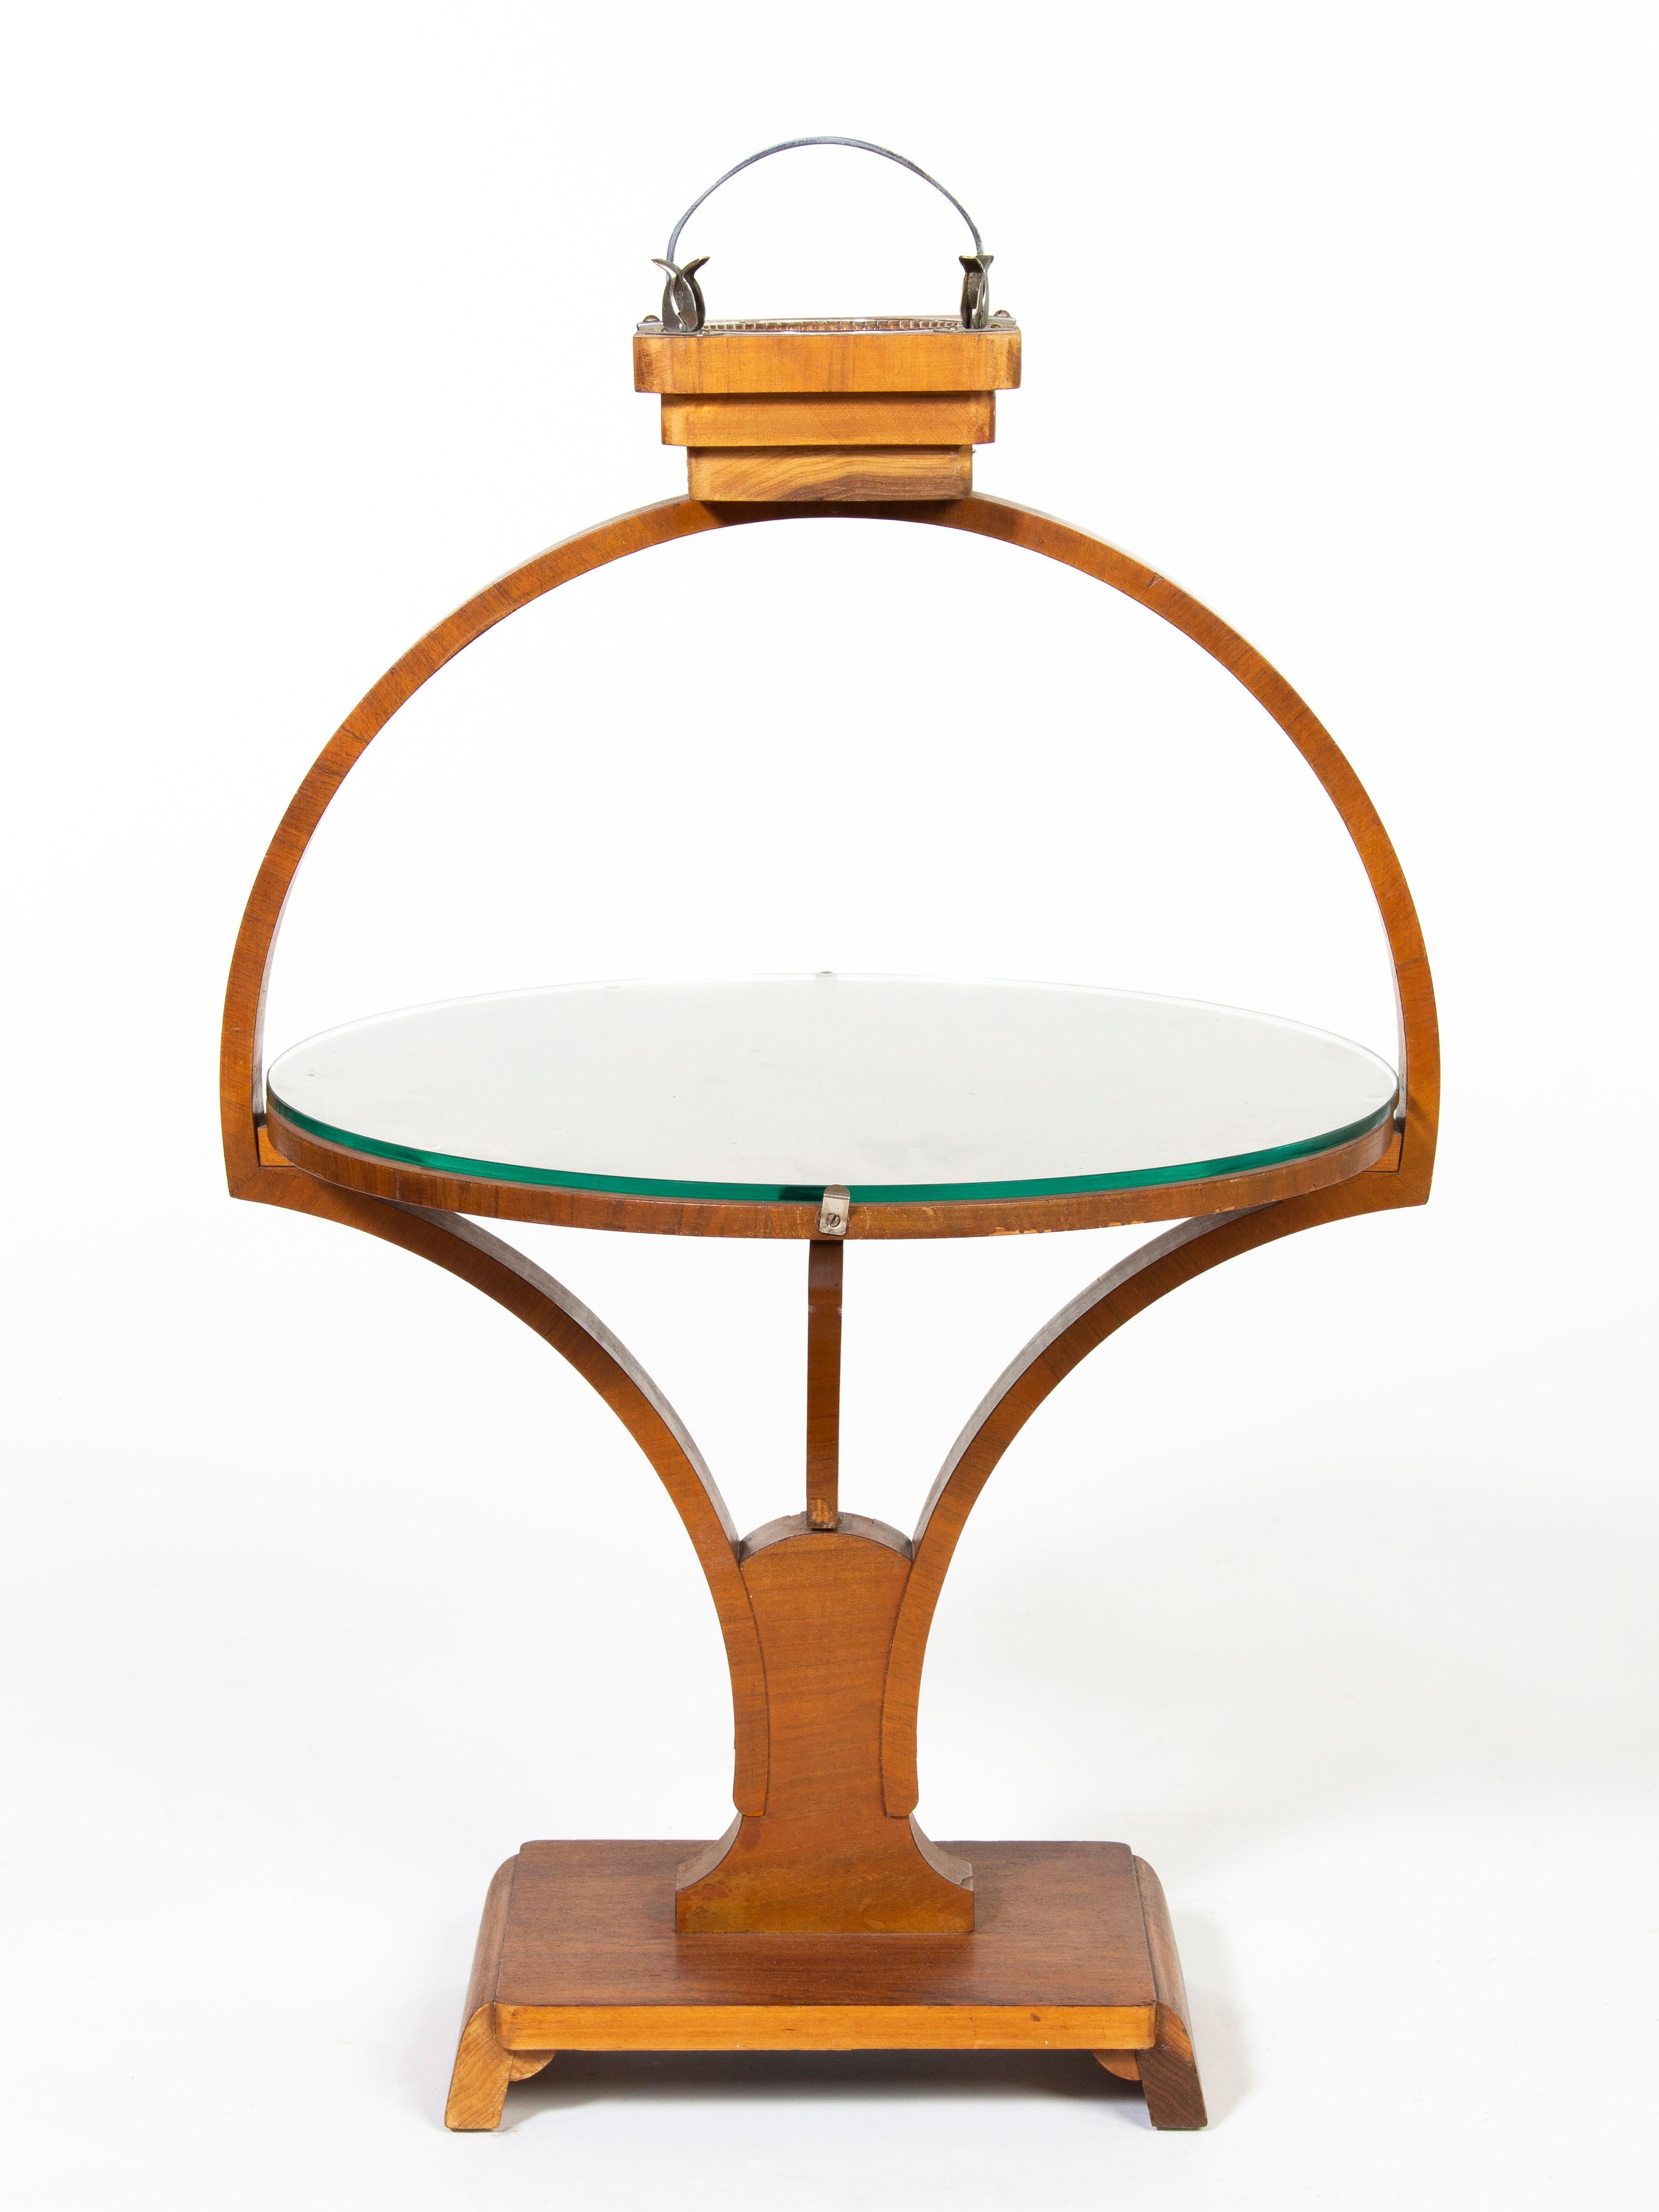 Circular smoking table with glass ashtray and cigarette holder.
Measures: Diameter: 45,5 cm
Table top height: 42 cm
Height incl. ashtray: 83 cm.